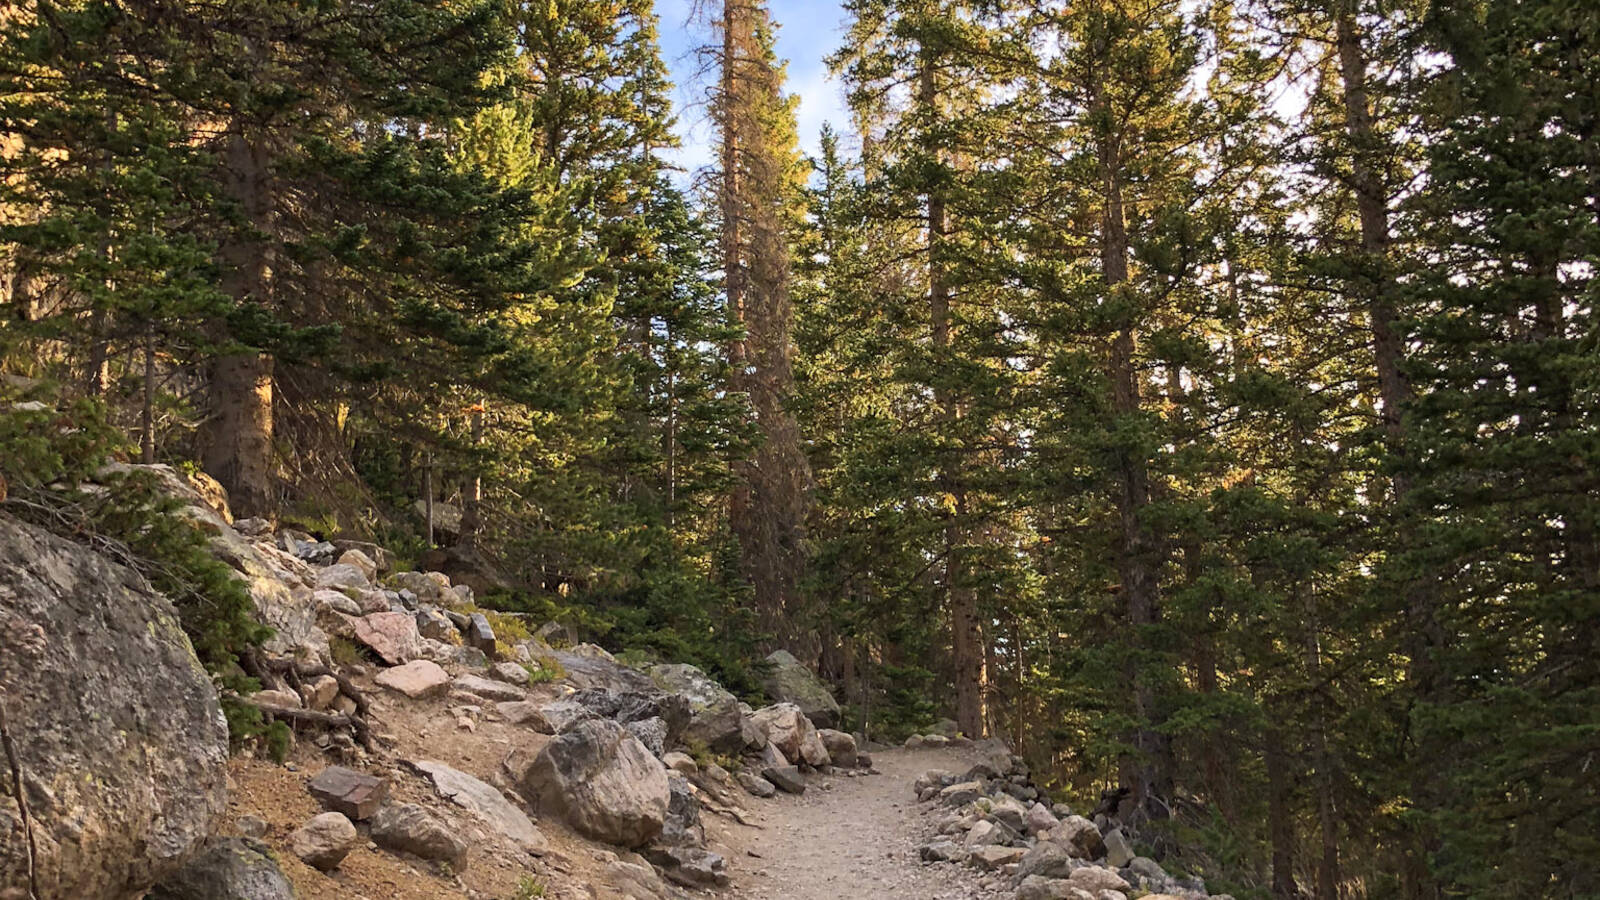 <p>Stay on trail when you're exploring Rocky Mountain National Park to ensure you're protecting wildlife and their habitats.</p>